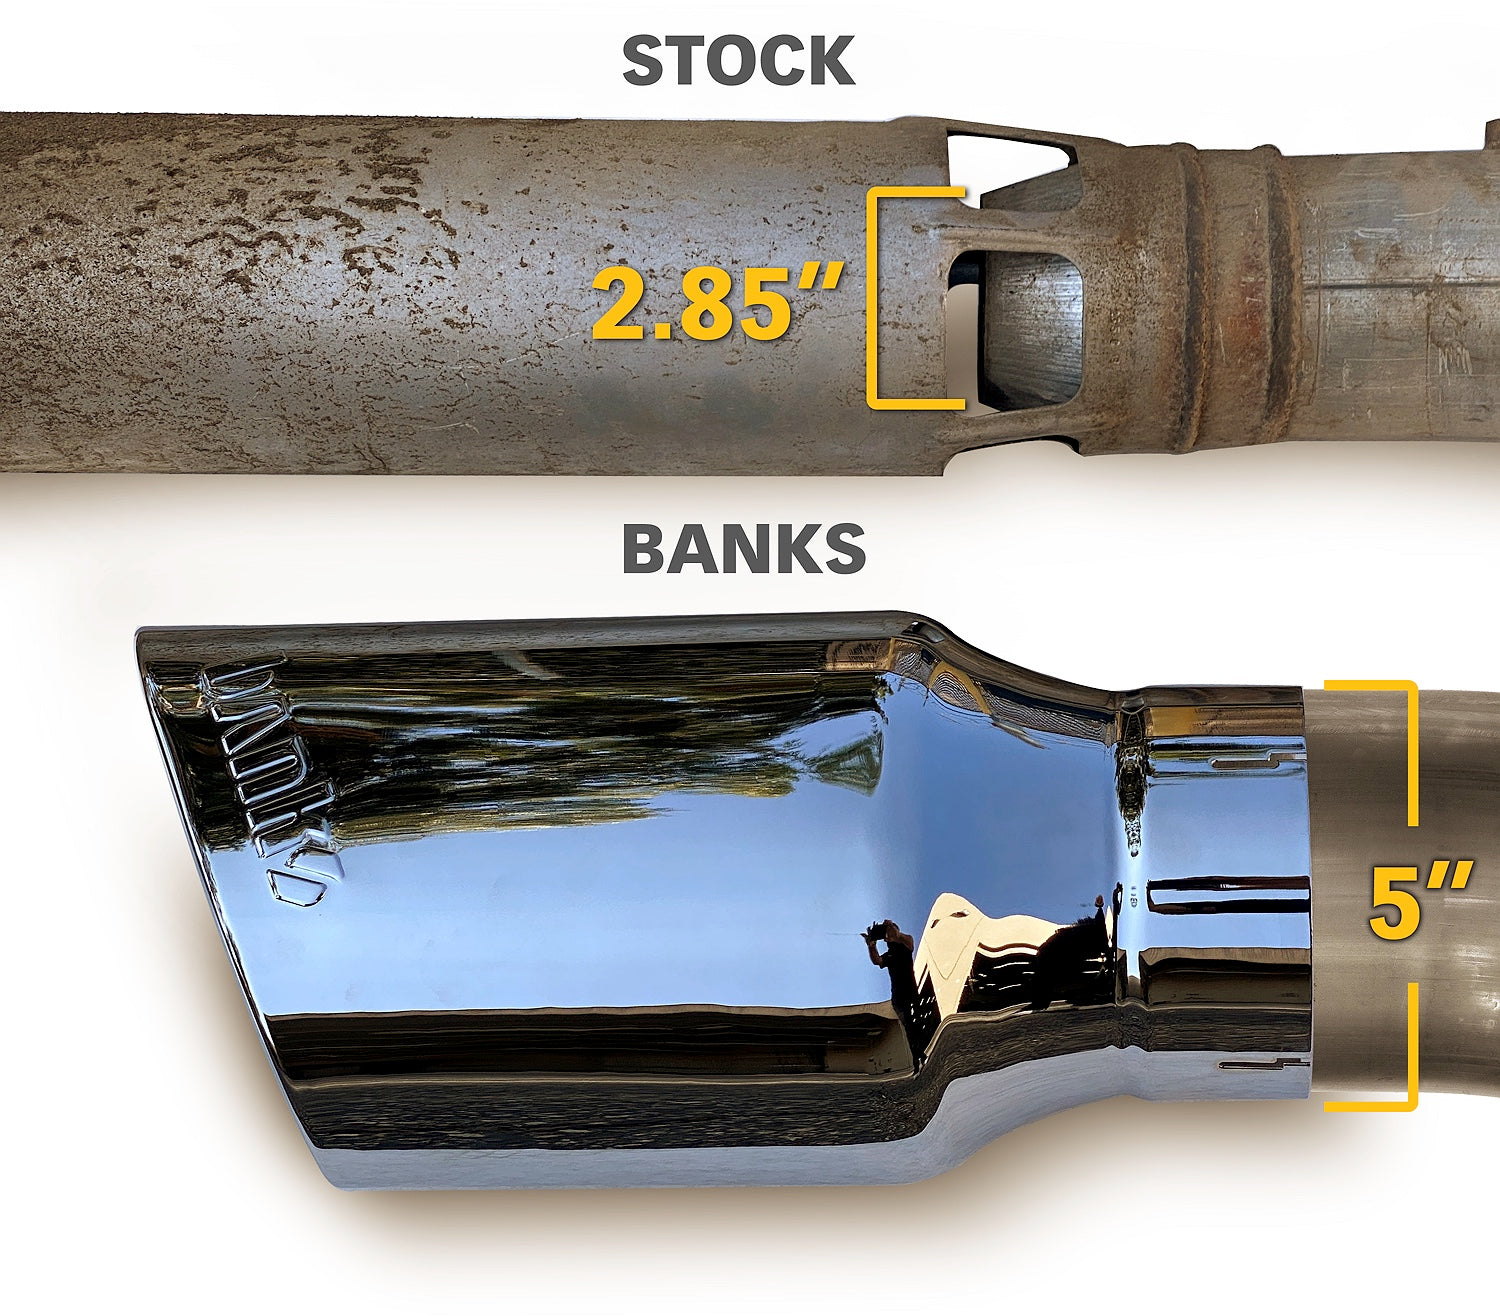 Comparison of the Banks 5In monster exhaust tip vs stock